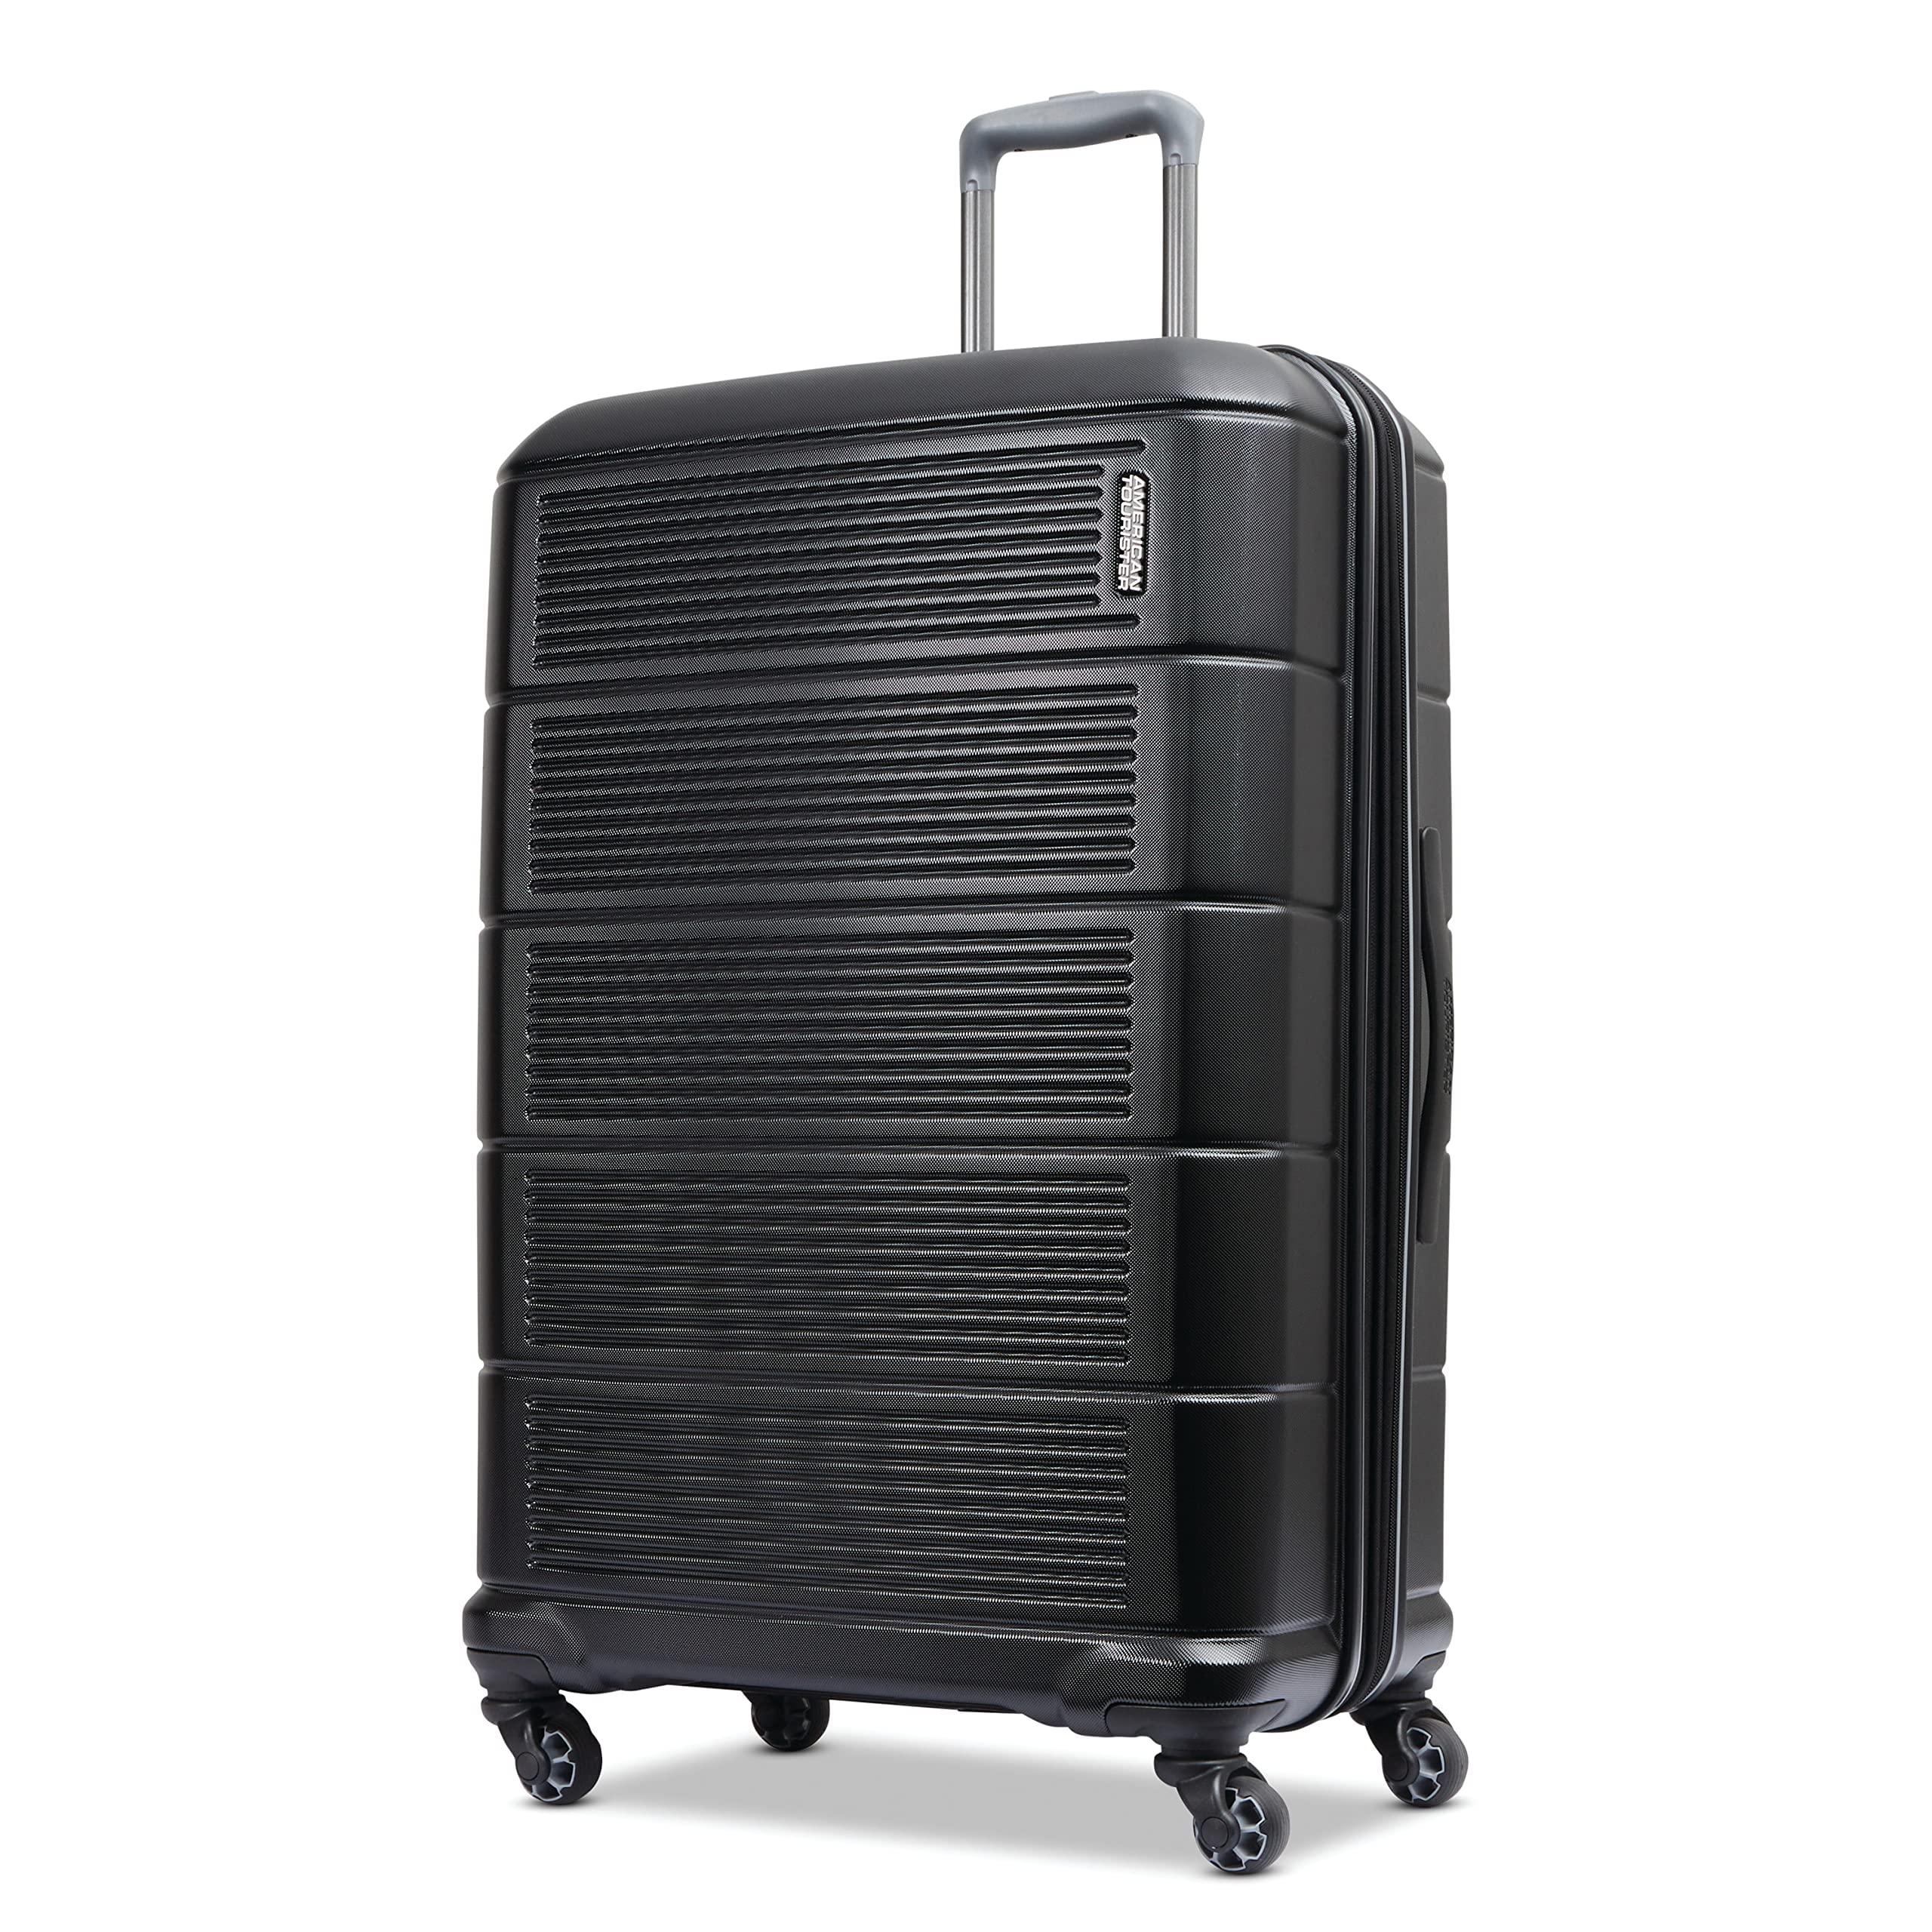 28" American Tourister Stratum 2.0 Expandable Hardside Luggage w/ Spinner Wheels (Jet Black) $66 + Free Shipping